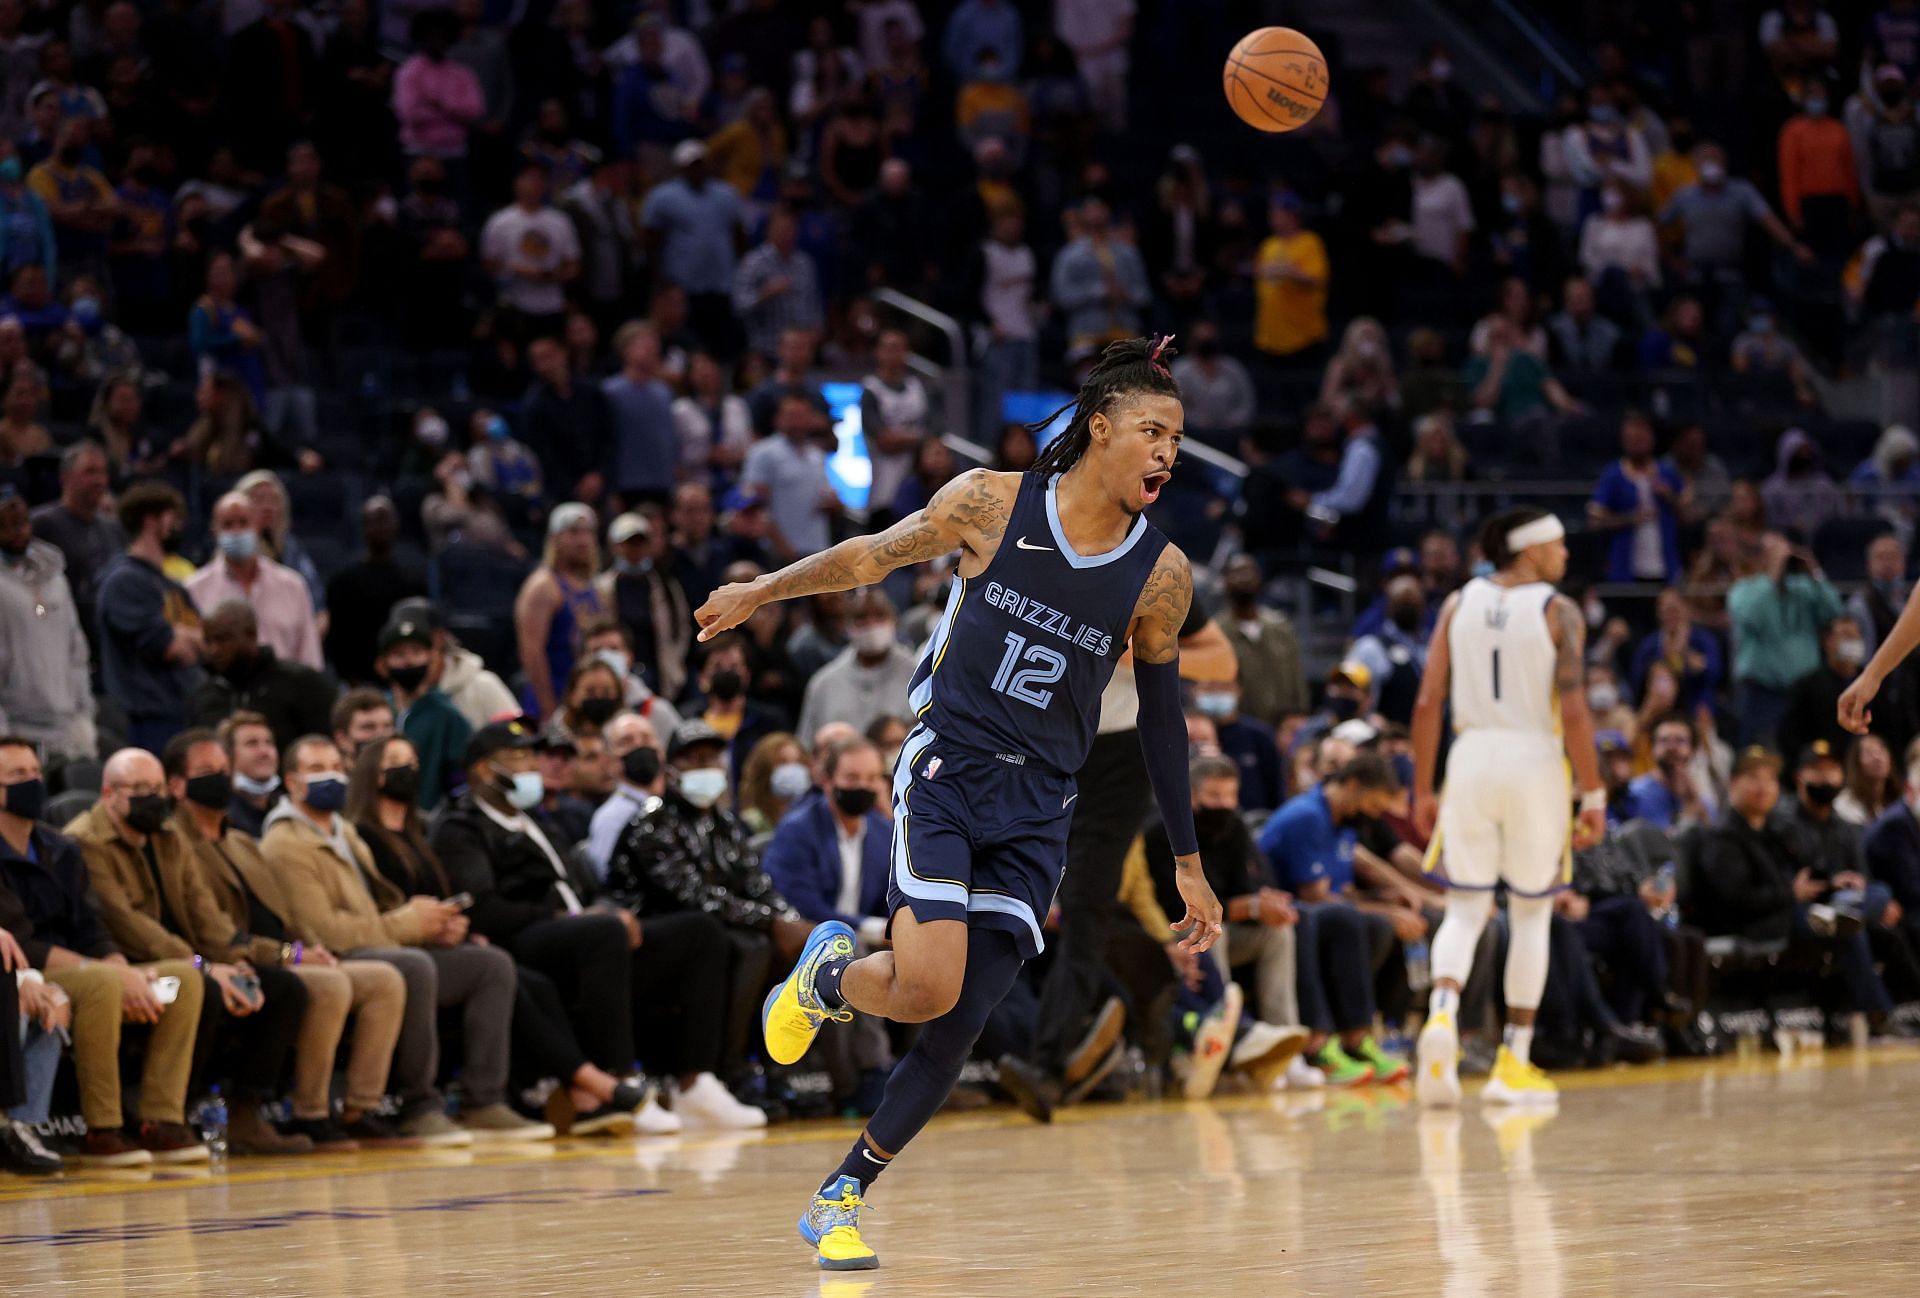 Ja Morant #12 of the Memphis Grizzlies celebrates after they beat the Golden State Warriors in overtime at Chase Center on October 28, 2021 in San Francisco, California.